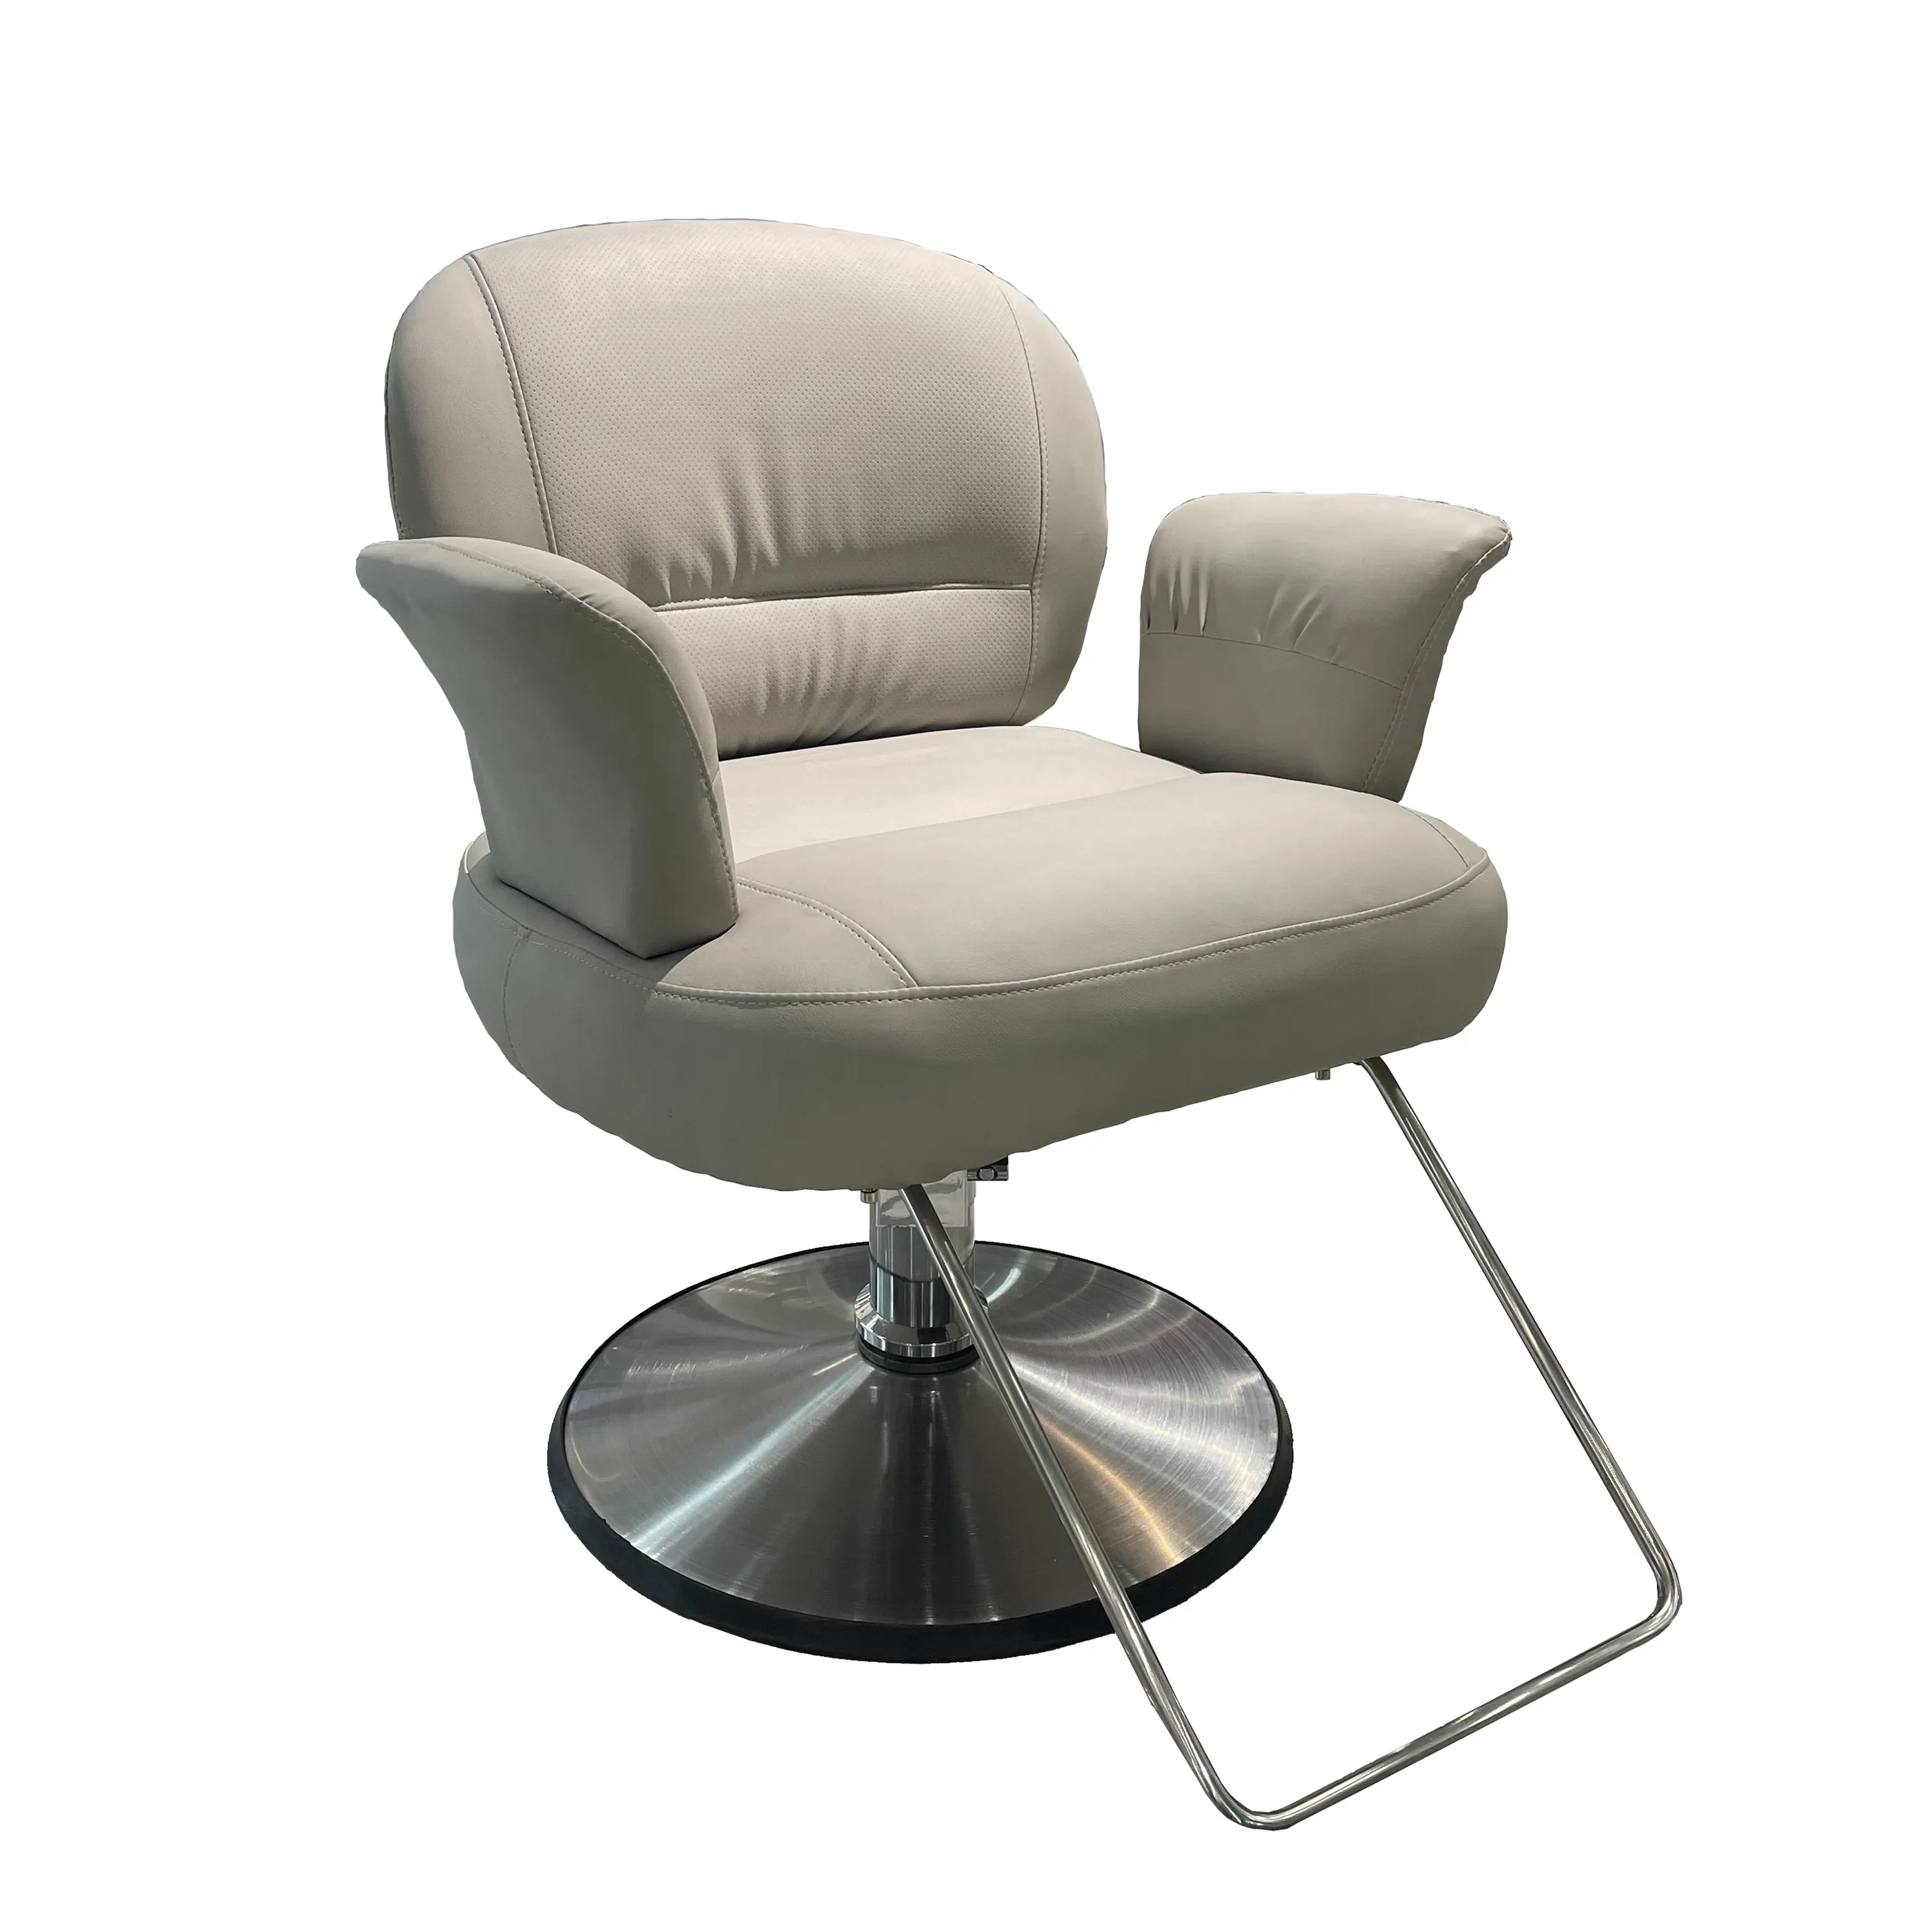 High quality salon hair equipment chairs stainless steel innovated rotating beauty chair for barber shop furniture